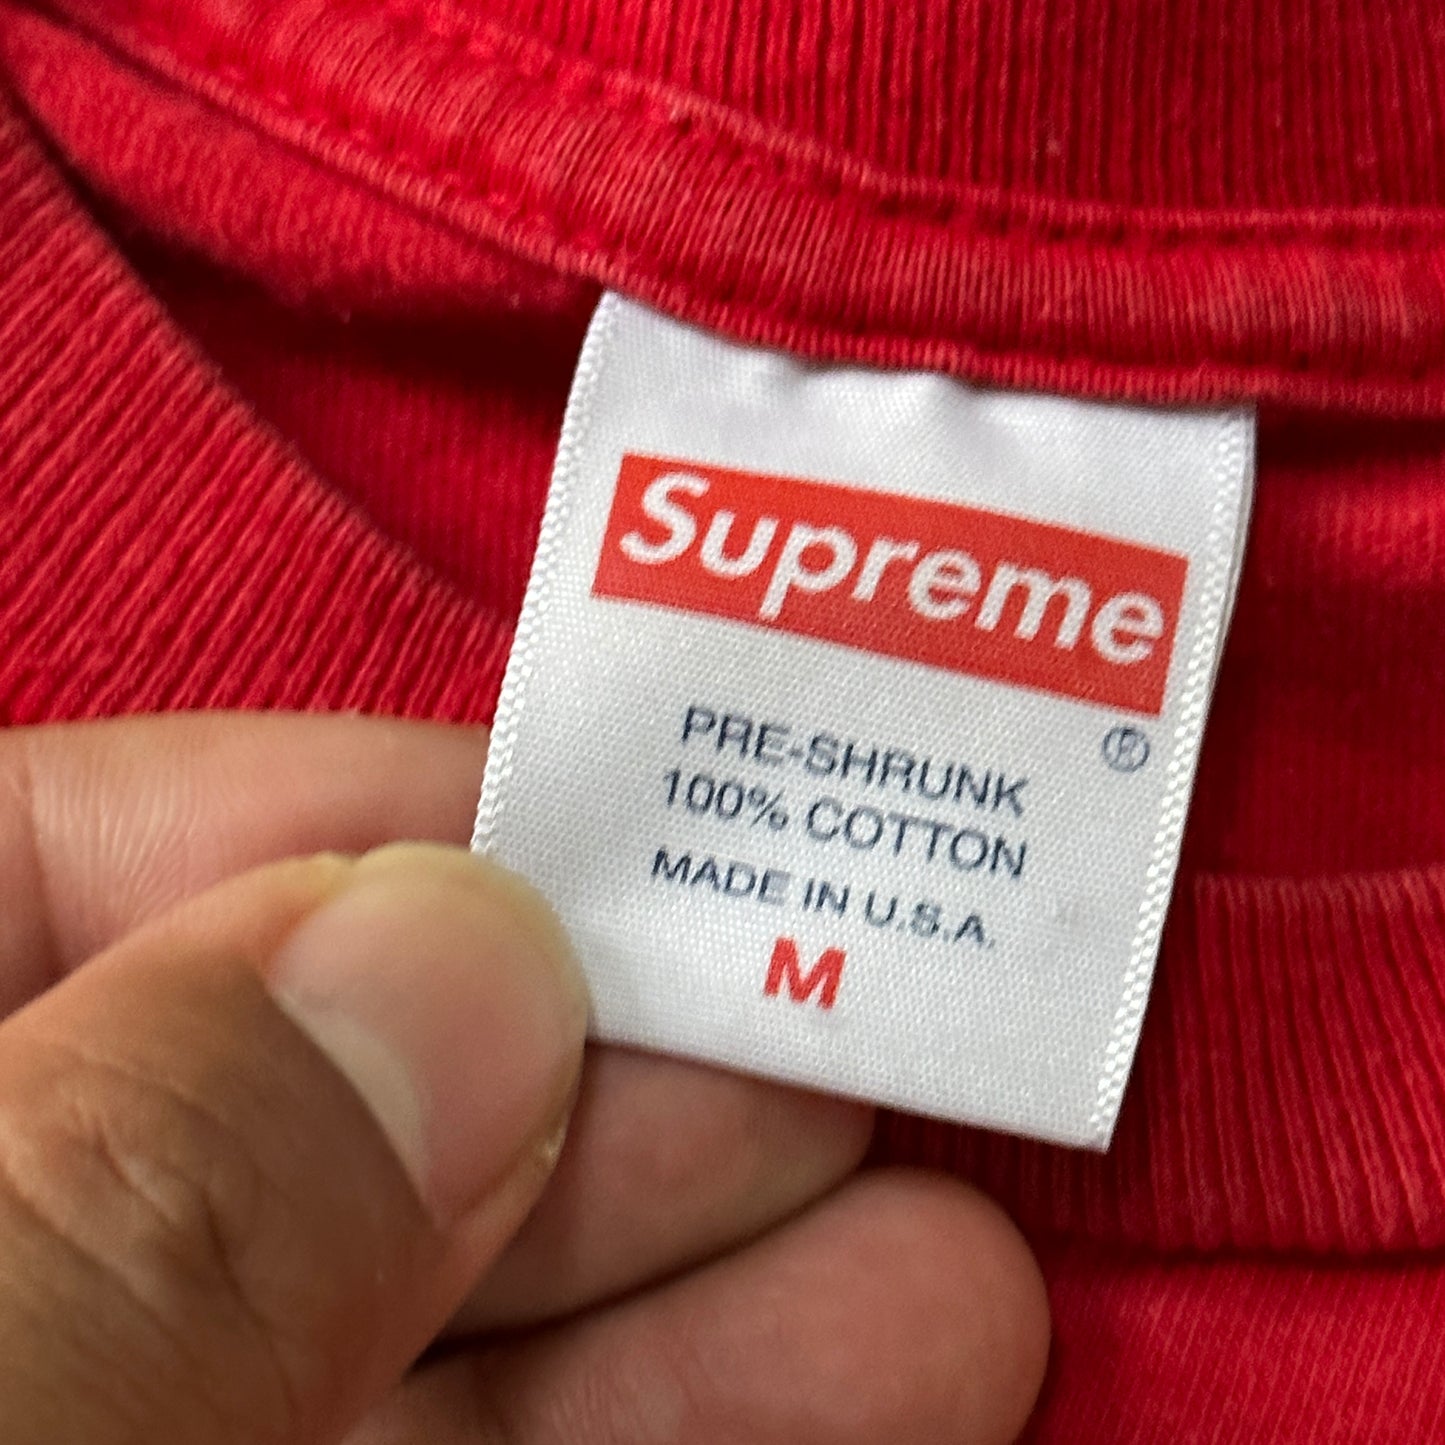 Supreme FW18 "Remember Your Friends T-shirt